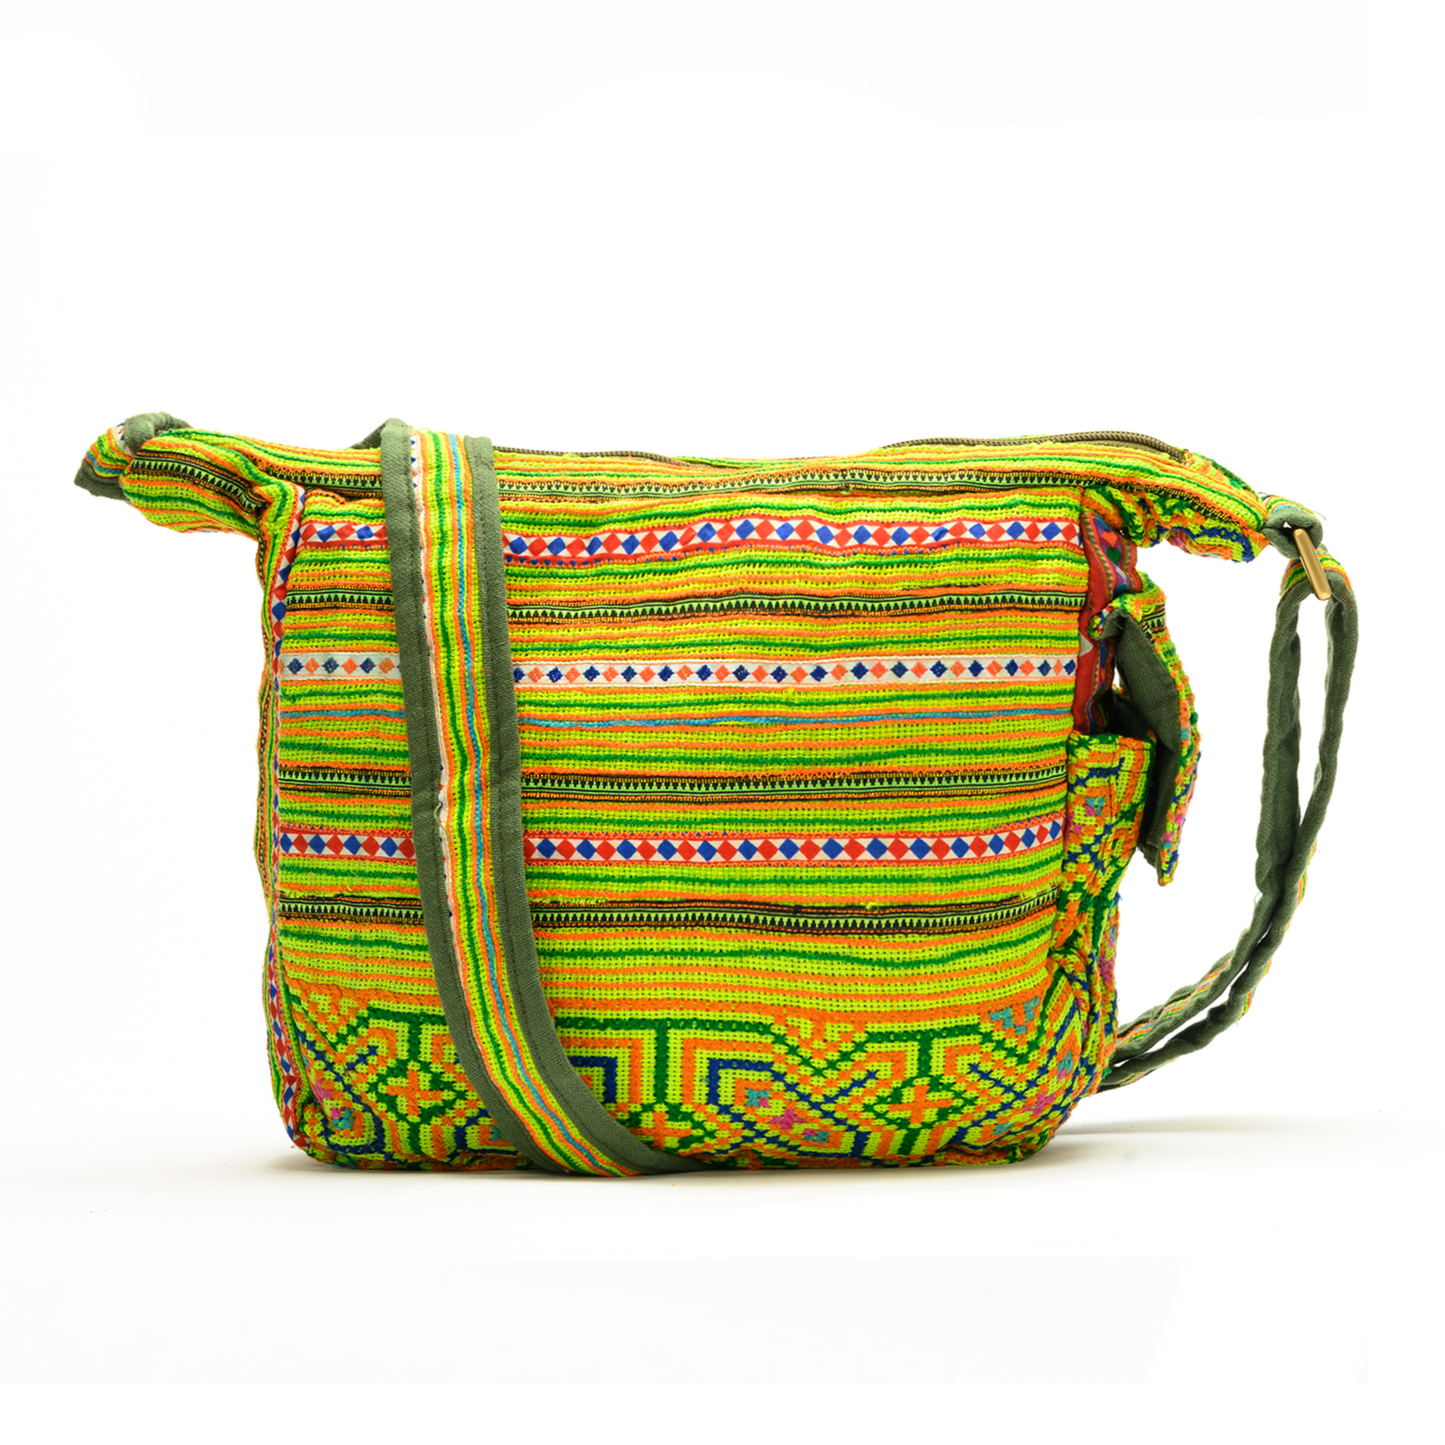 Boho-style linen, embroidery cross-body bag, H'mong tribal pattern in bright GREEN